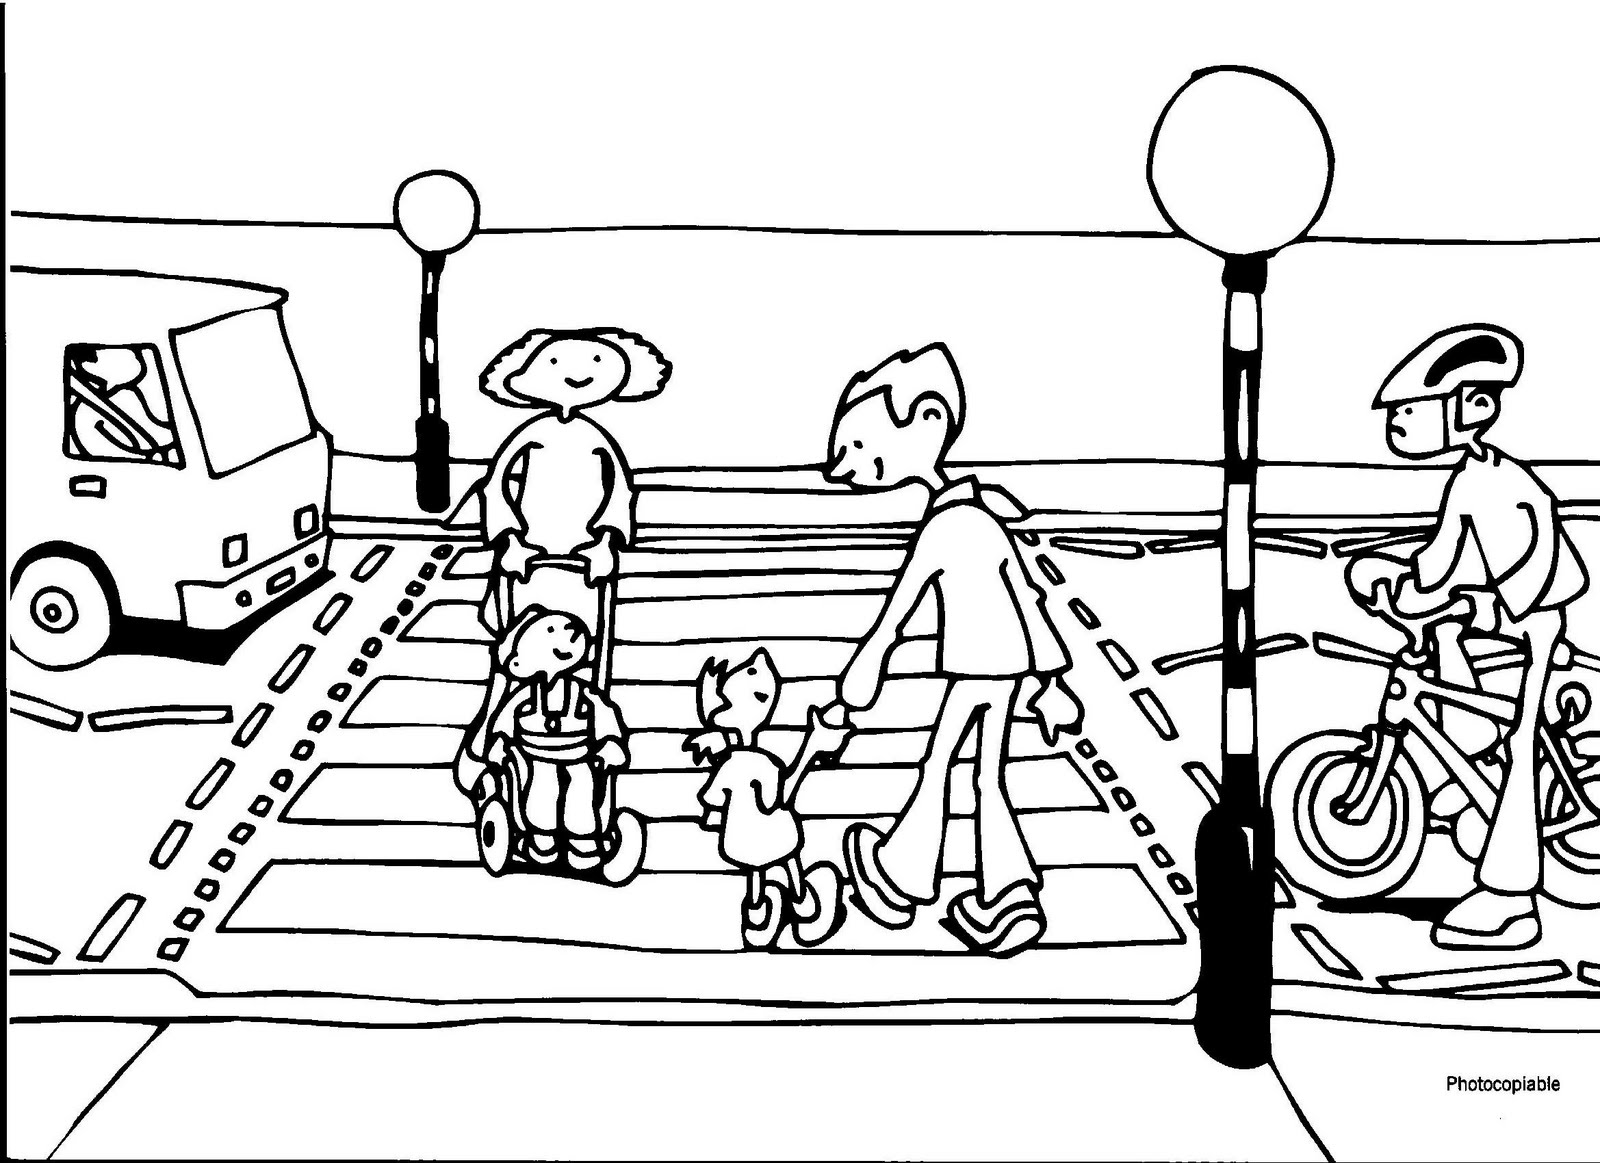 Download 287+ Safely Sew Childrens Toys Coloring Pages PNG PDF File